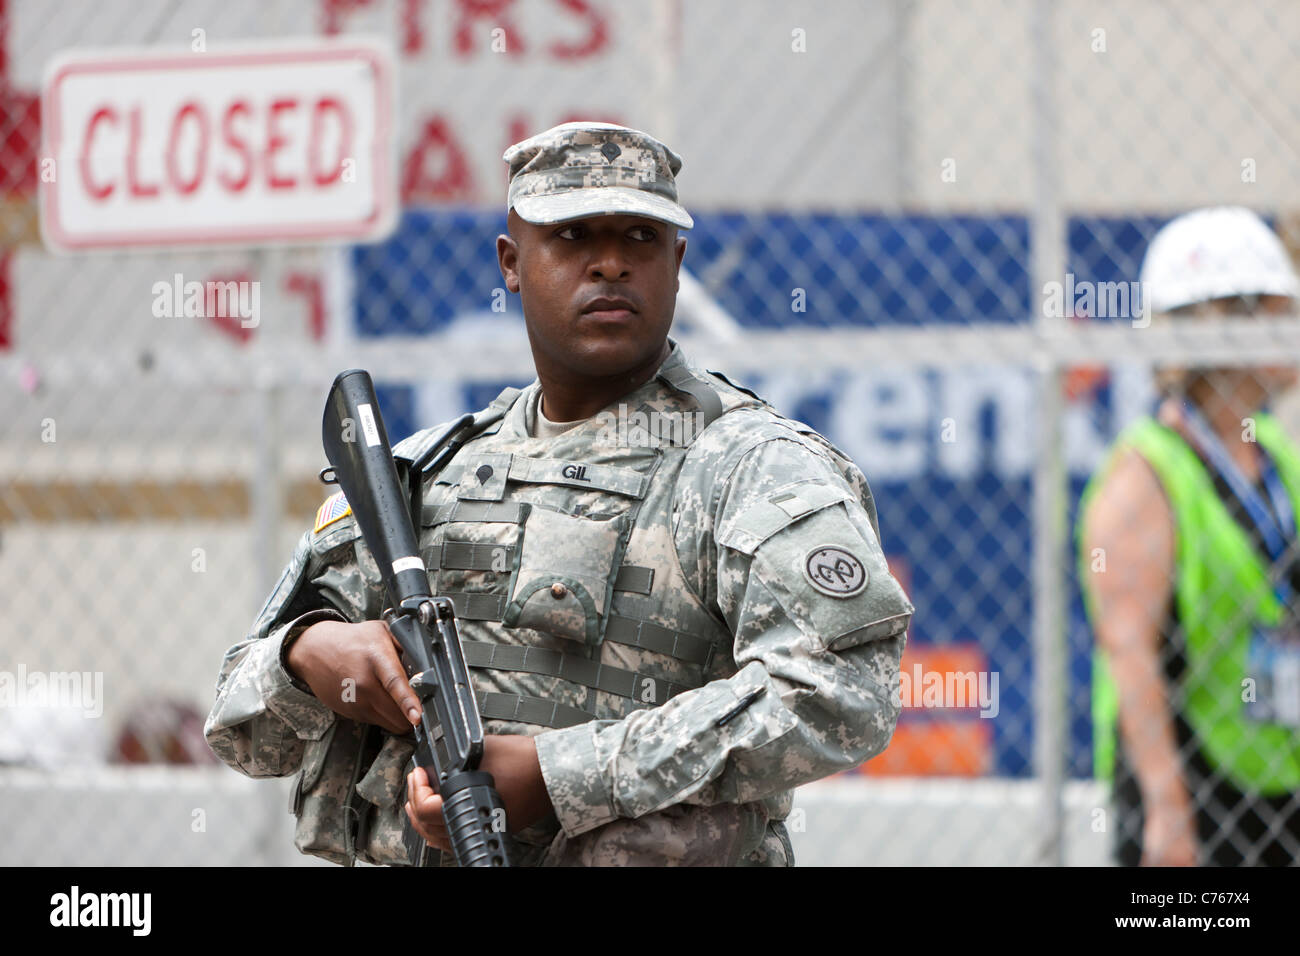 A marine armed with assault rifle at the World Trade Center PATH station. Stock Photo